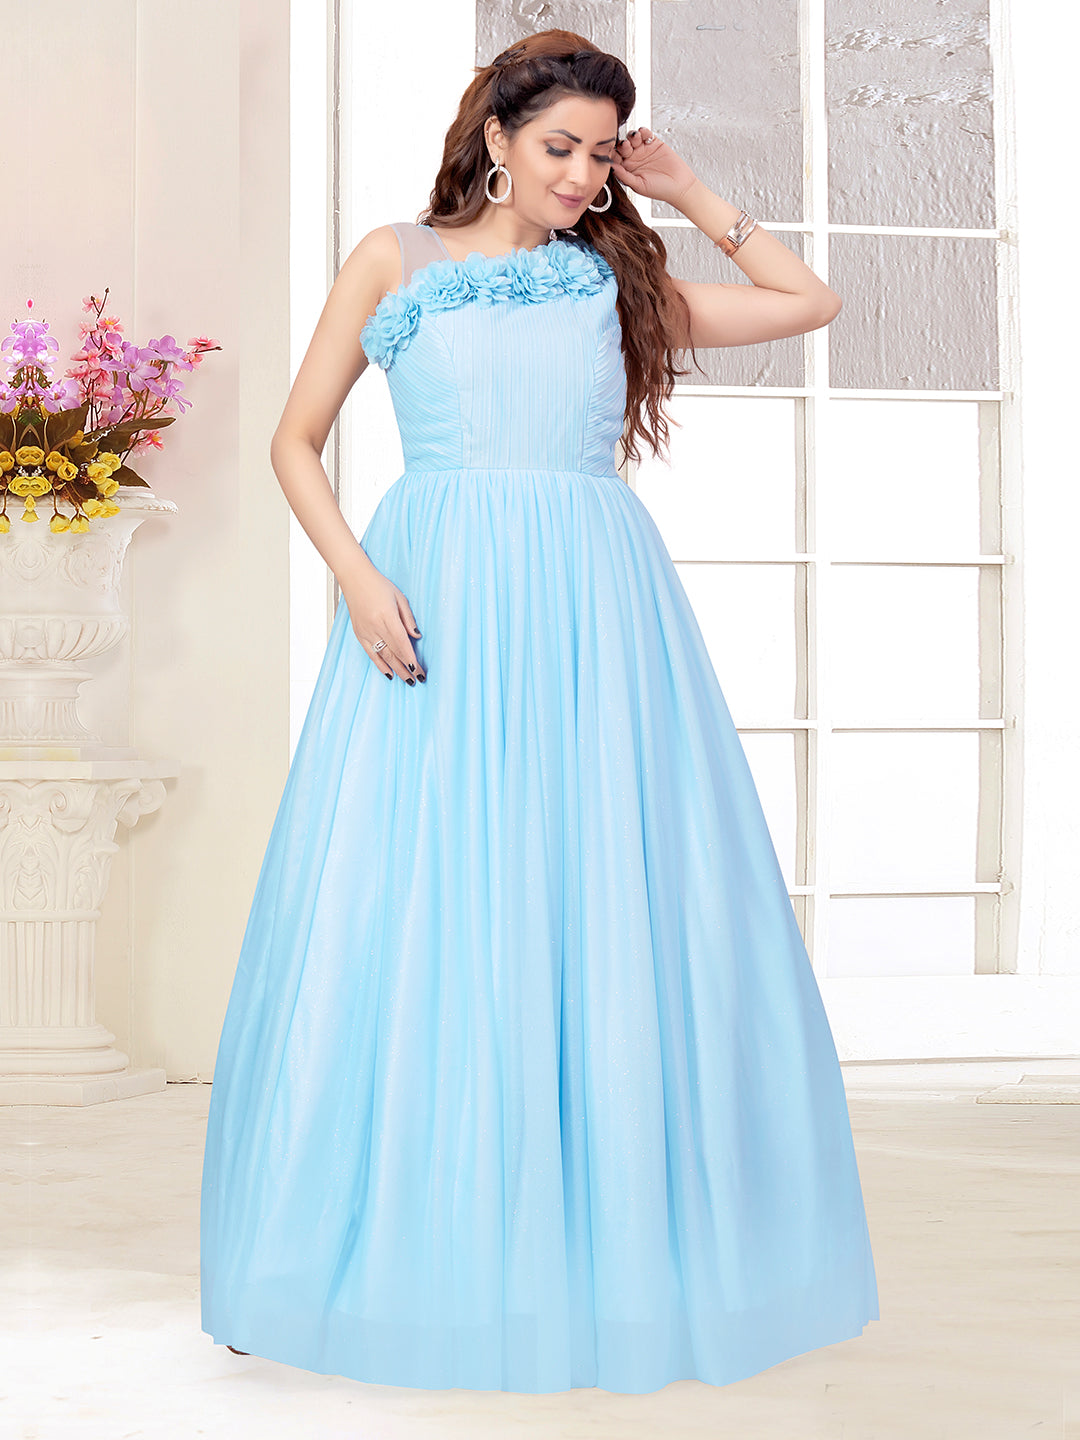 Rent2dress - Beautiful Evening dress to rent or to buy to... | Facebook